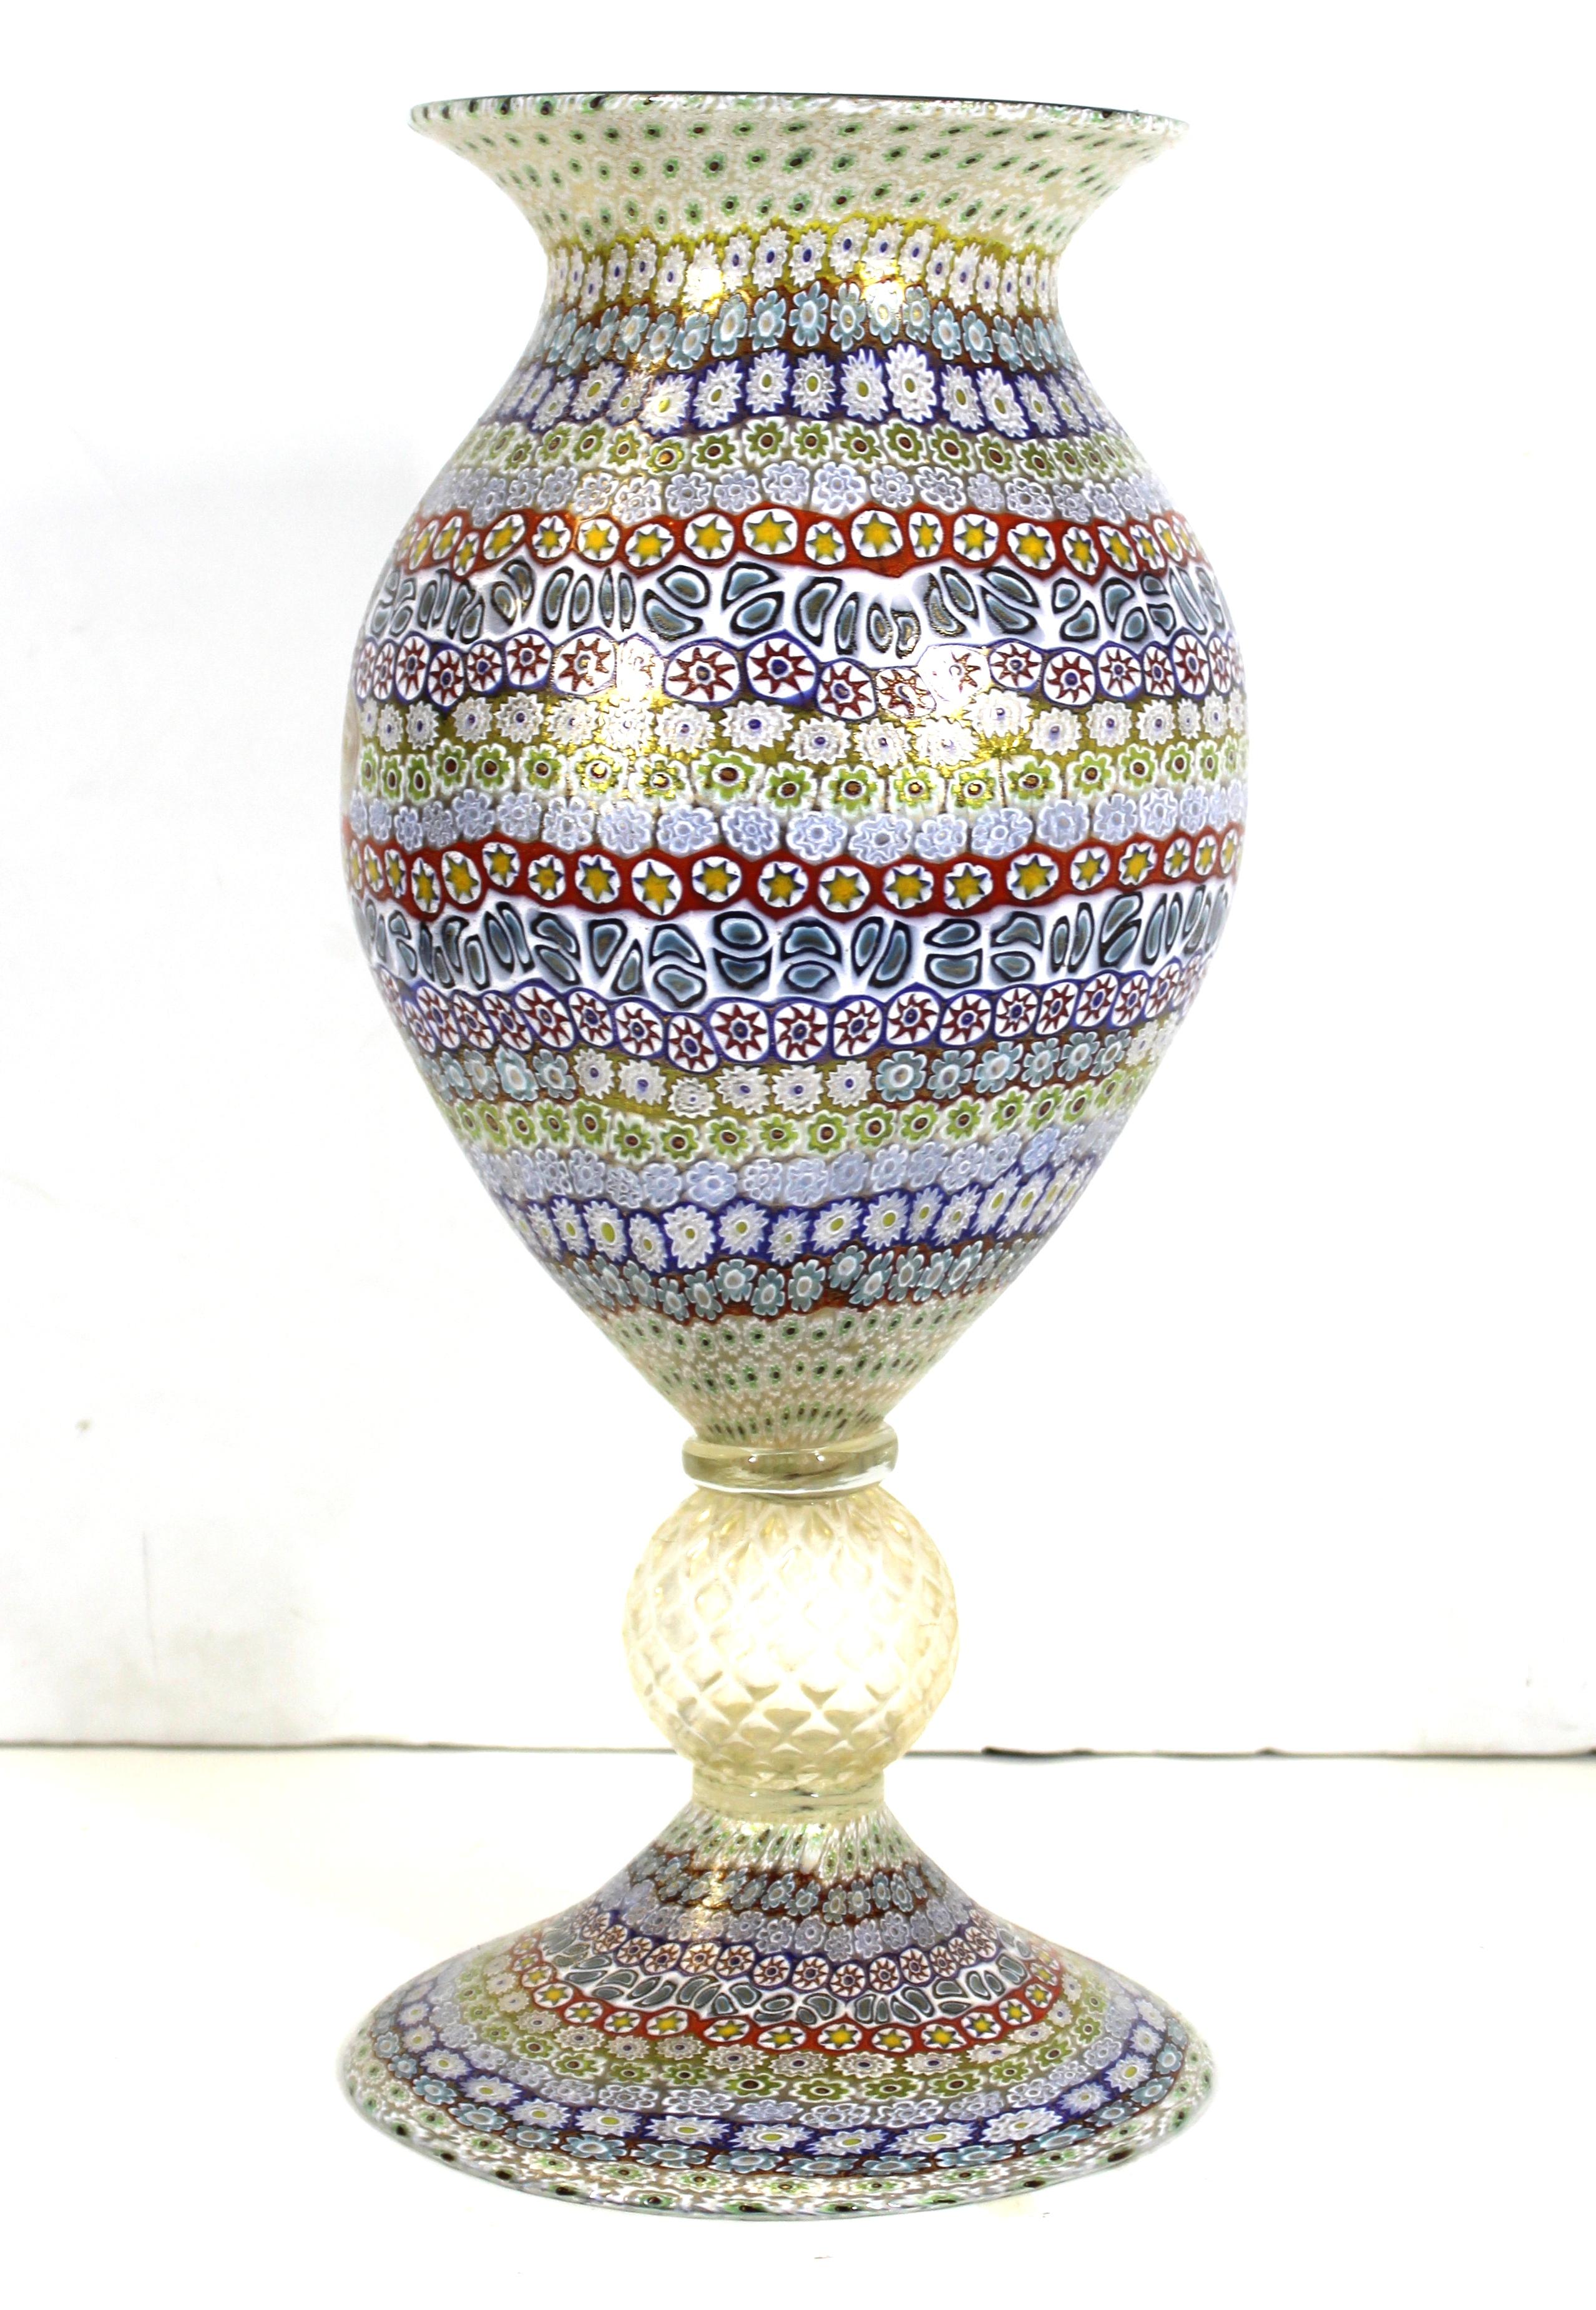 Italian Murano glass monumental millefiori vase created by Maestro Imperio Rossi during the late 20th century on the famed island of Murano in Venice. The piece is crafted of innumerable glass murrine depicting minuscule flowers into a grand vase